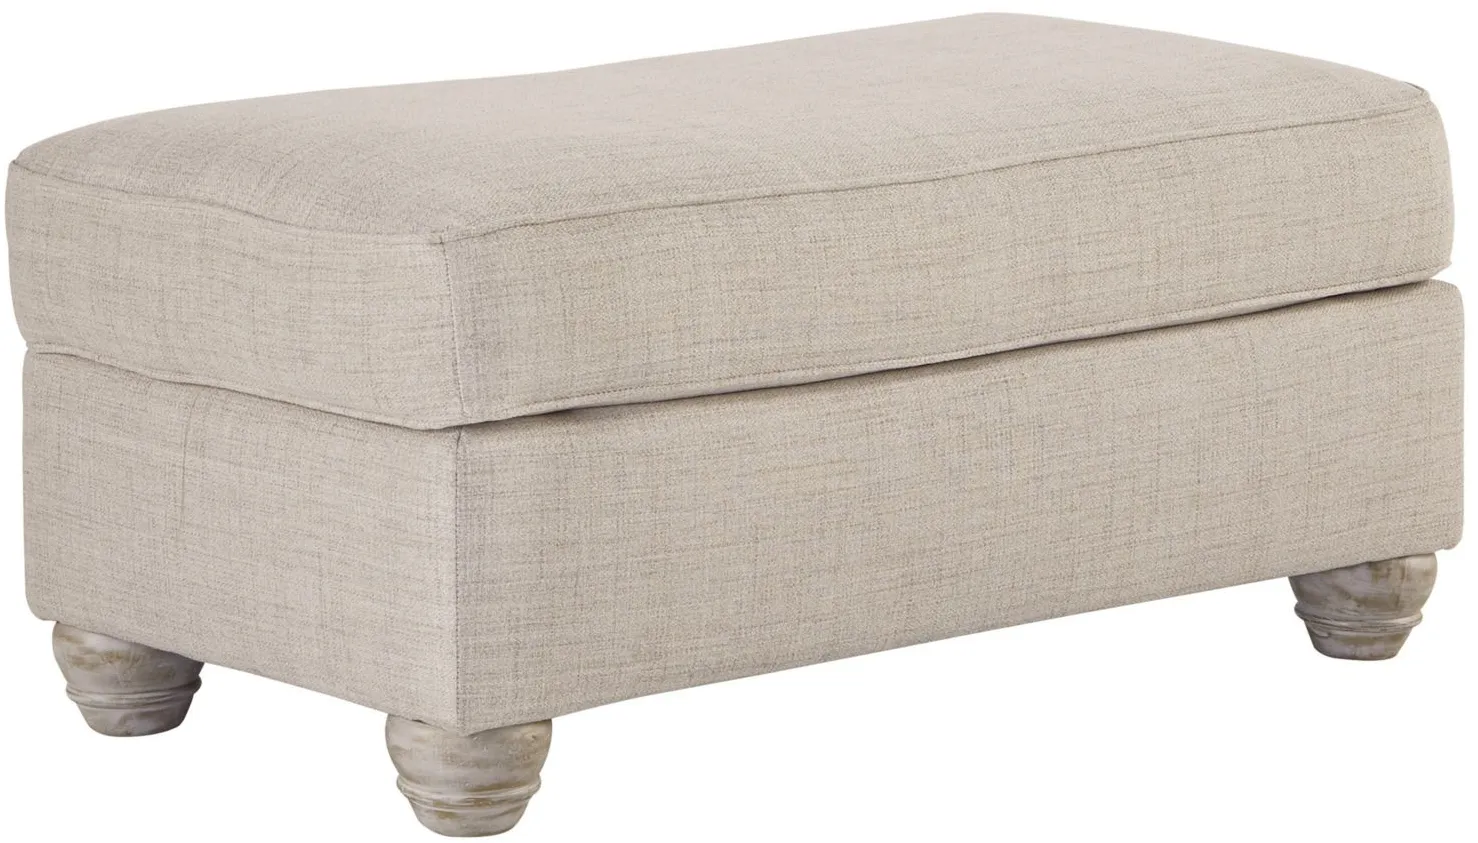 Trixie Chair Ottoman in Linen by Ashley Furniture